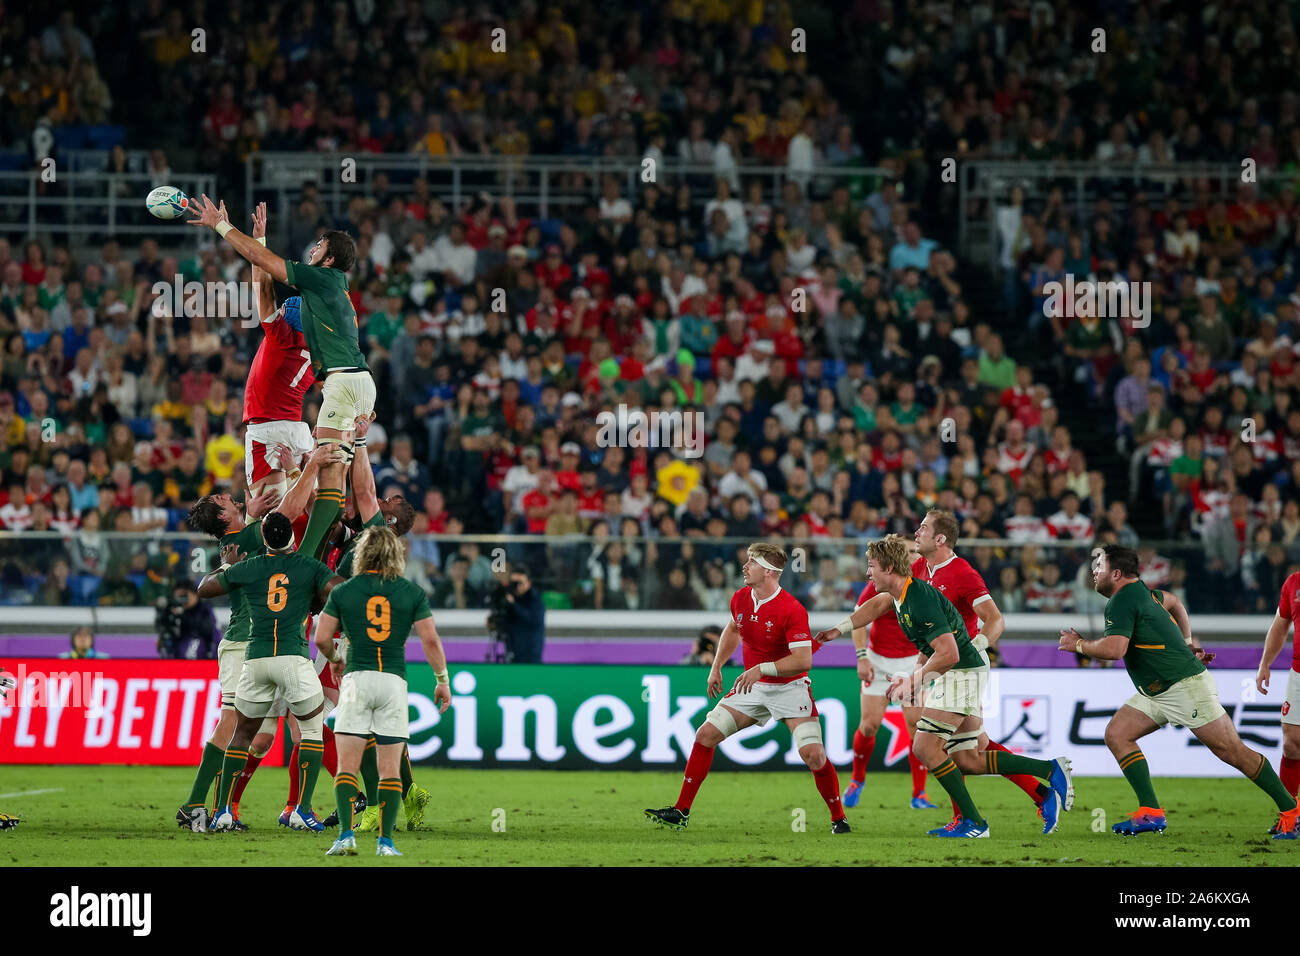 Kanagawa, Japan. 27th Oct, 2019. Justin Tipuric of Wales and Lood De Jager of South Africa battle for the ball in a lineout during the 2019 Rugby World Cup semi-final match between Wales and South Africa at International Stadium Yokohama in Kanagawa, Japan on October 27, 2019. Credit: Aflo Co. Ltd./Alamy Live News Stock Photo